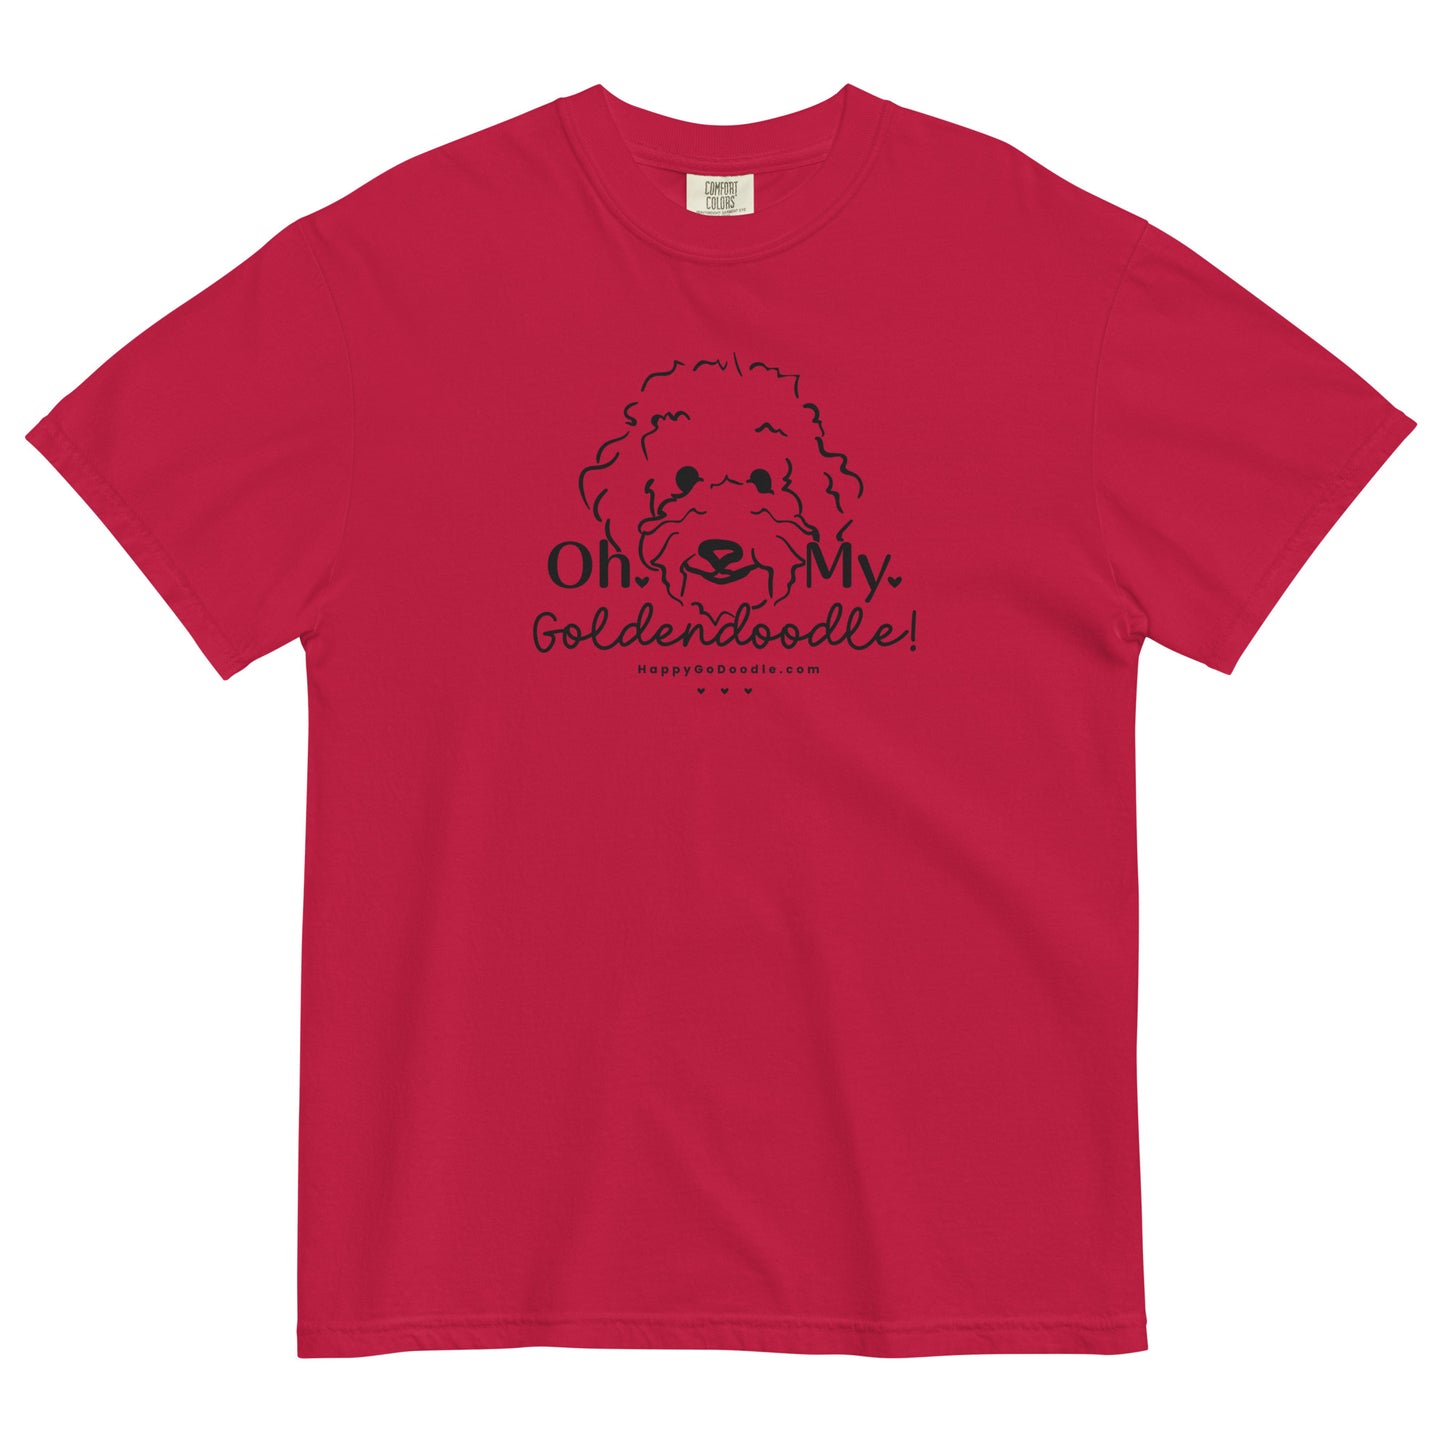 Goldendoodle comfort colors t-shirt with Goldendoodle face and words "Oh My Goldendoodle" in red color